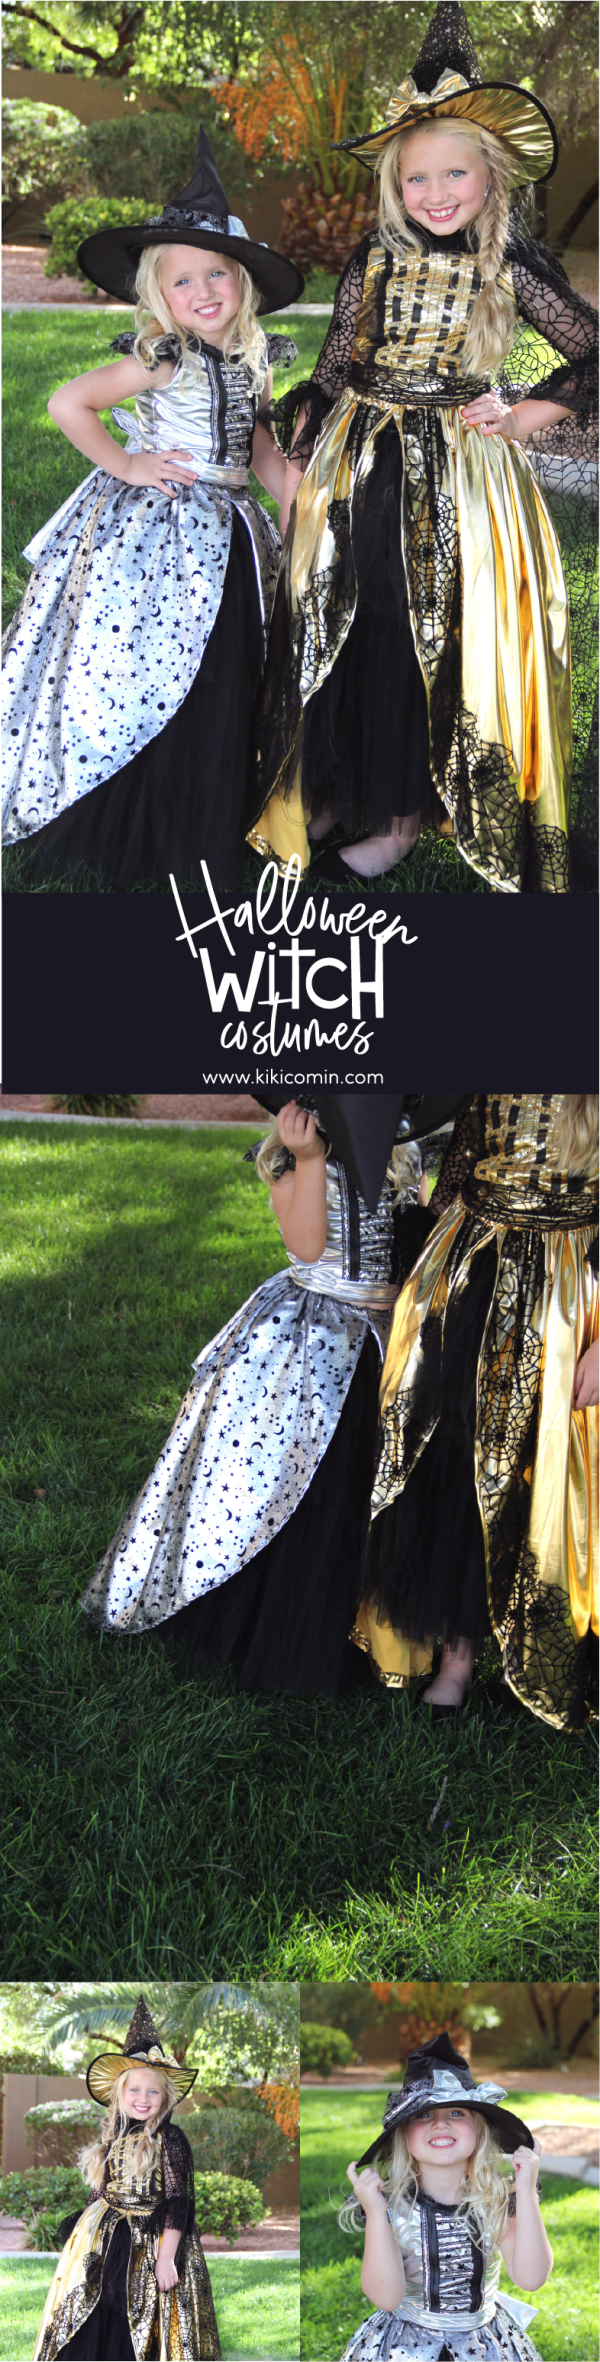 Halloween Witch Costumes at kiki and company. Cutest costumes!